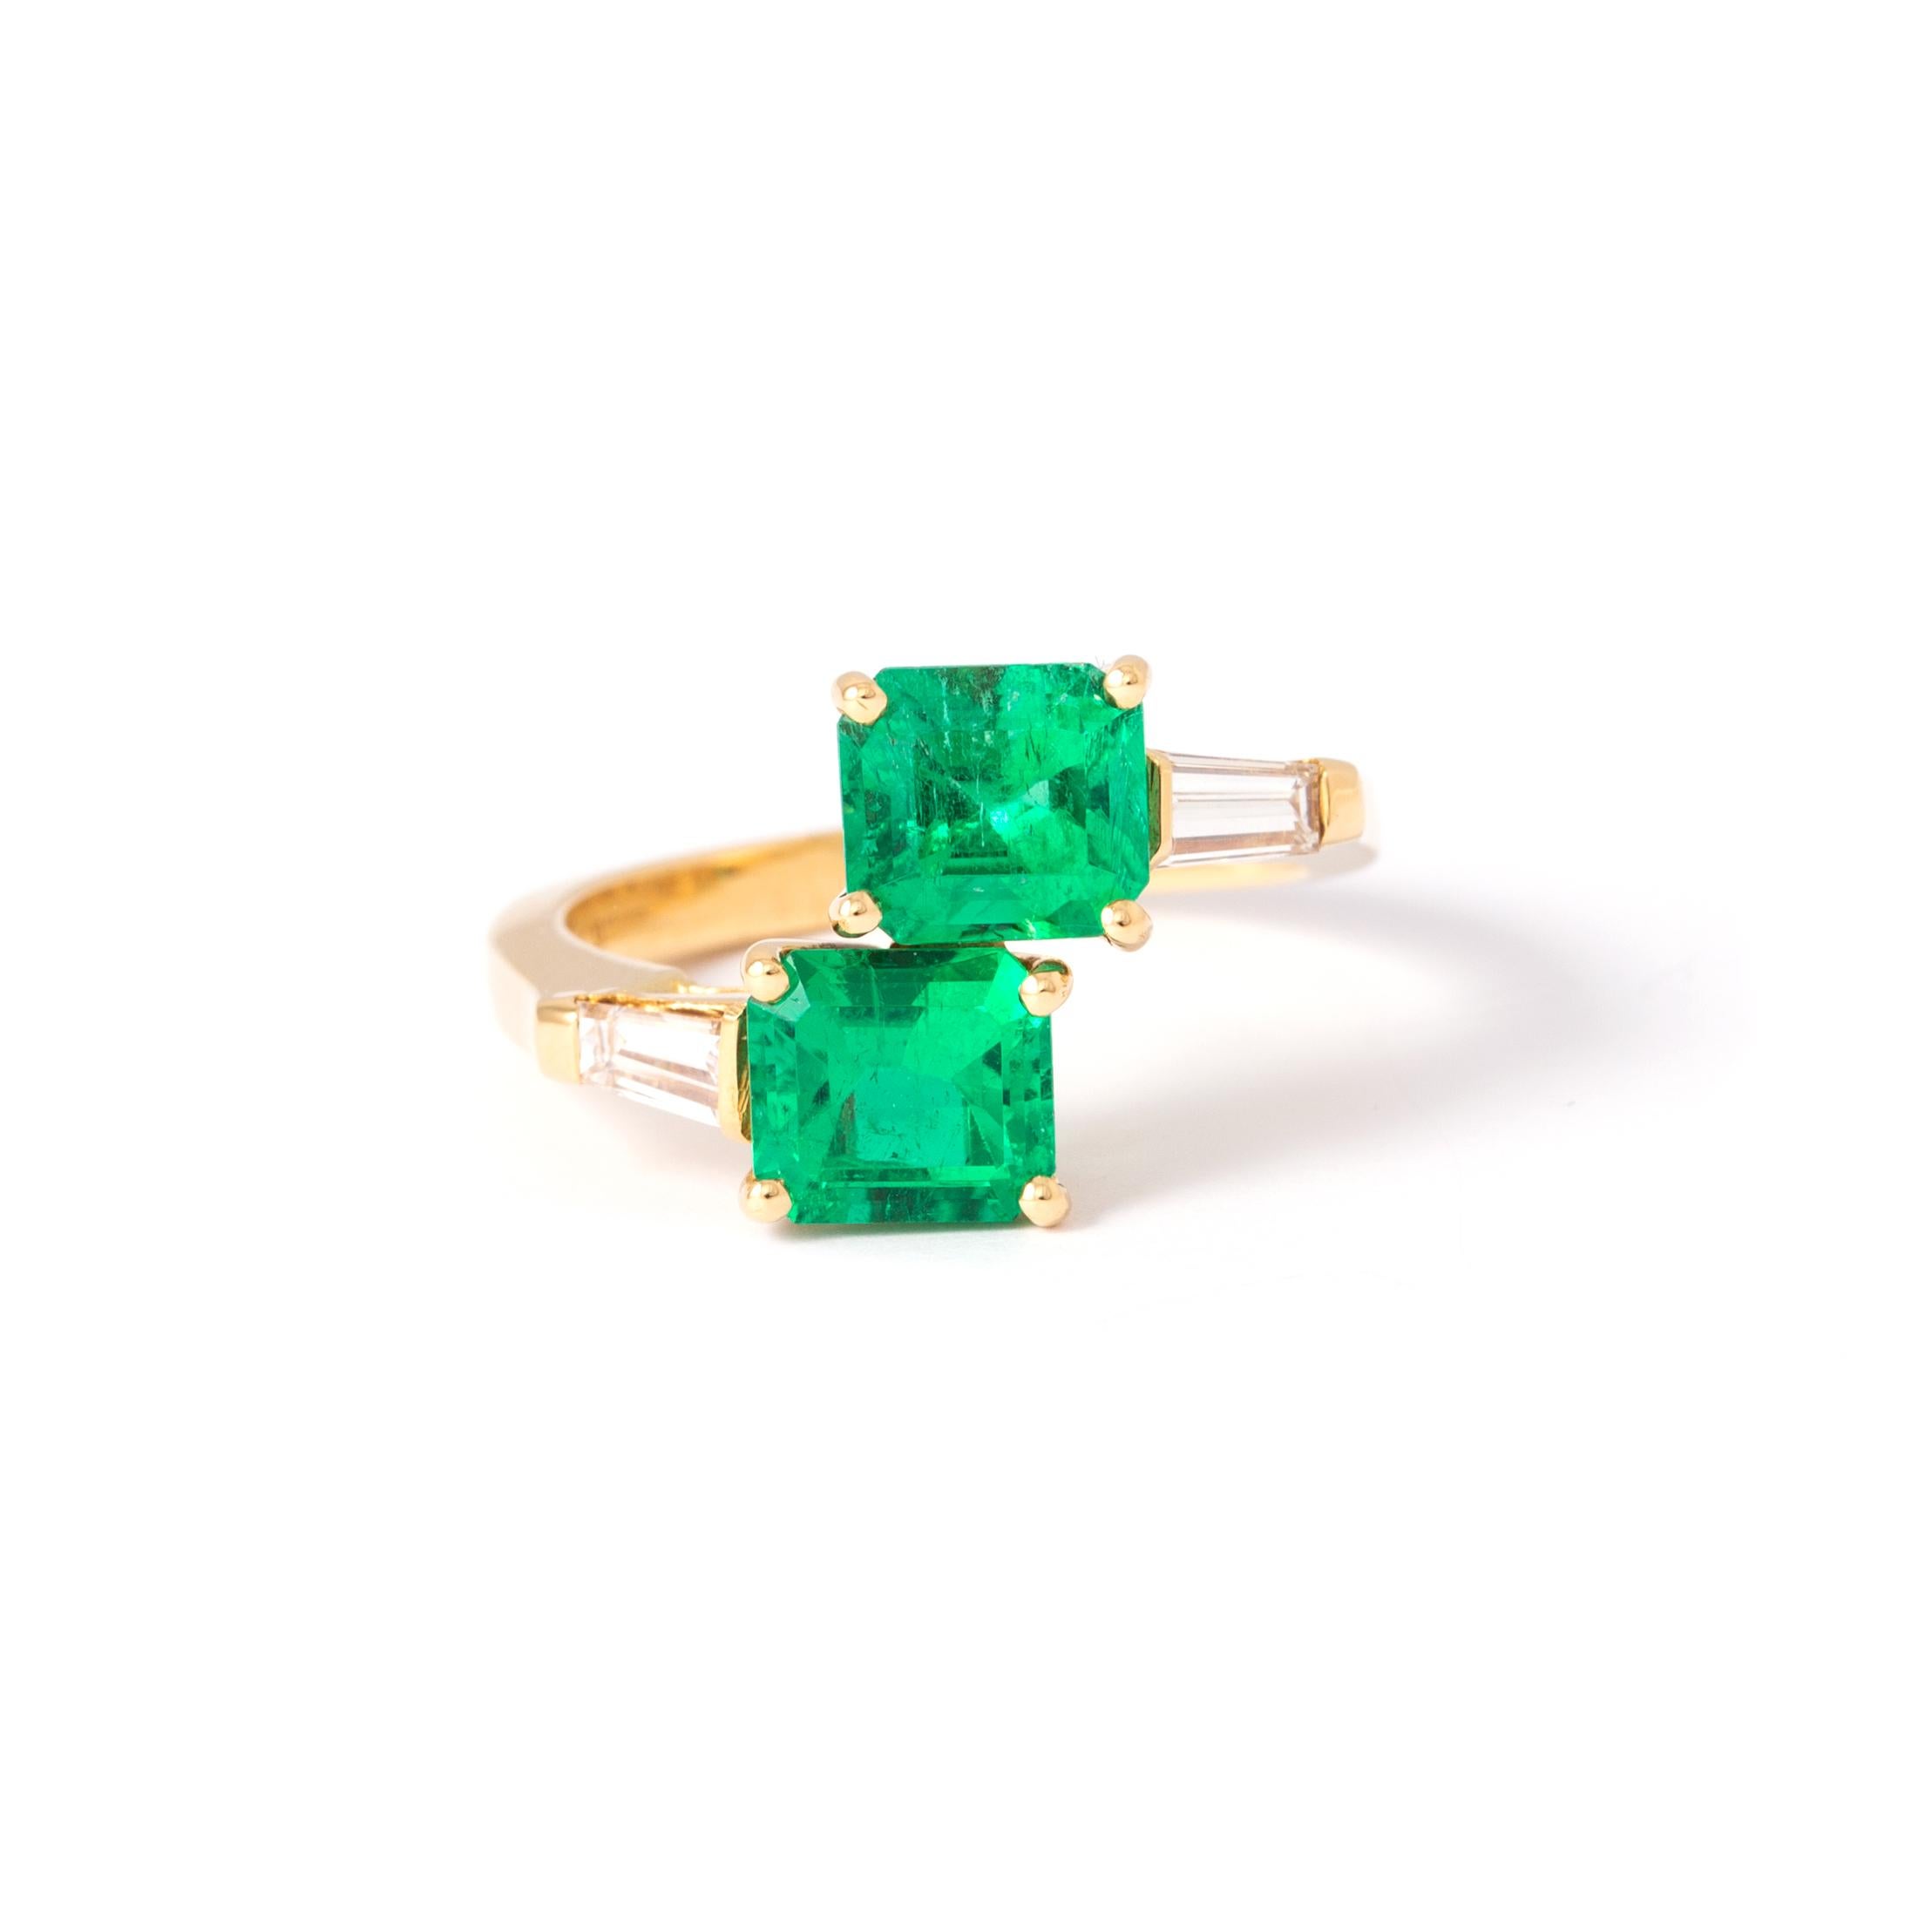 Ring in 18kt yellow gold set with emeralds 2.15 cts  and 2 diamonds 0.36 cts Size 51       